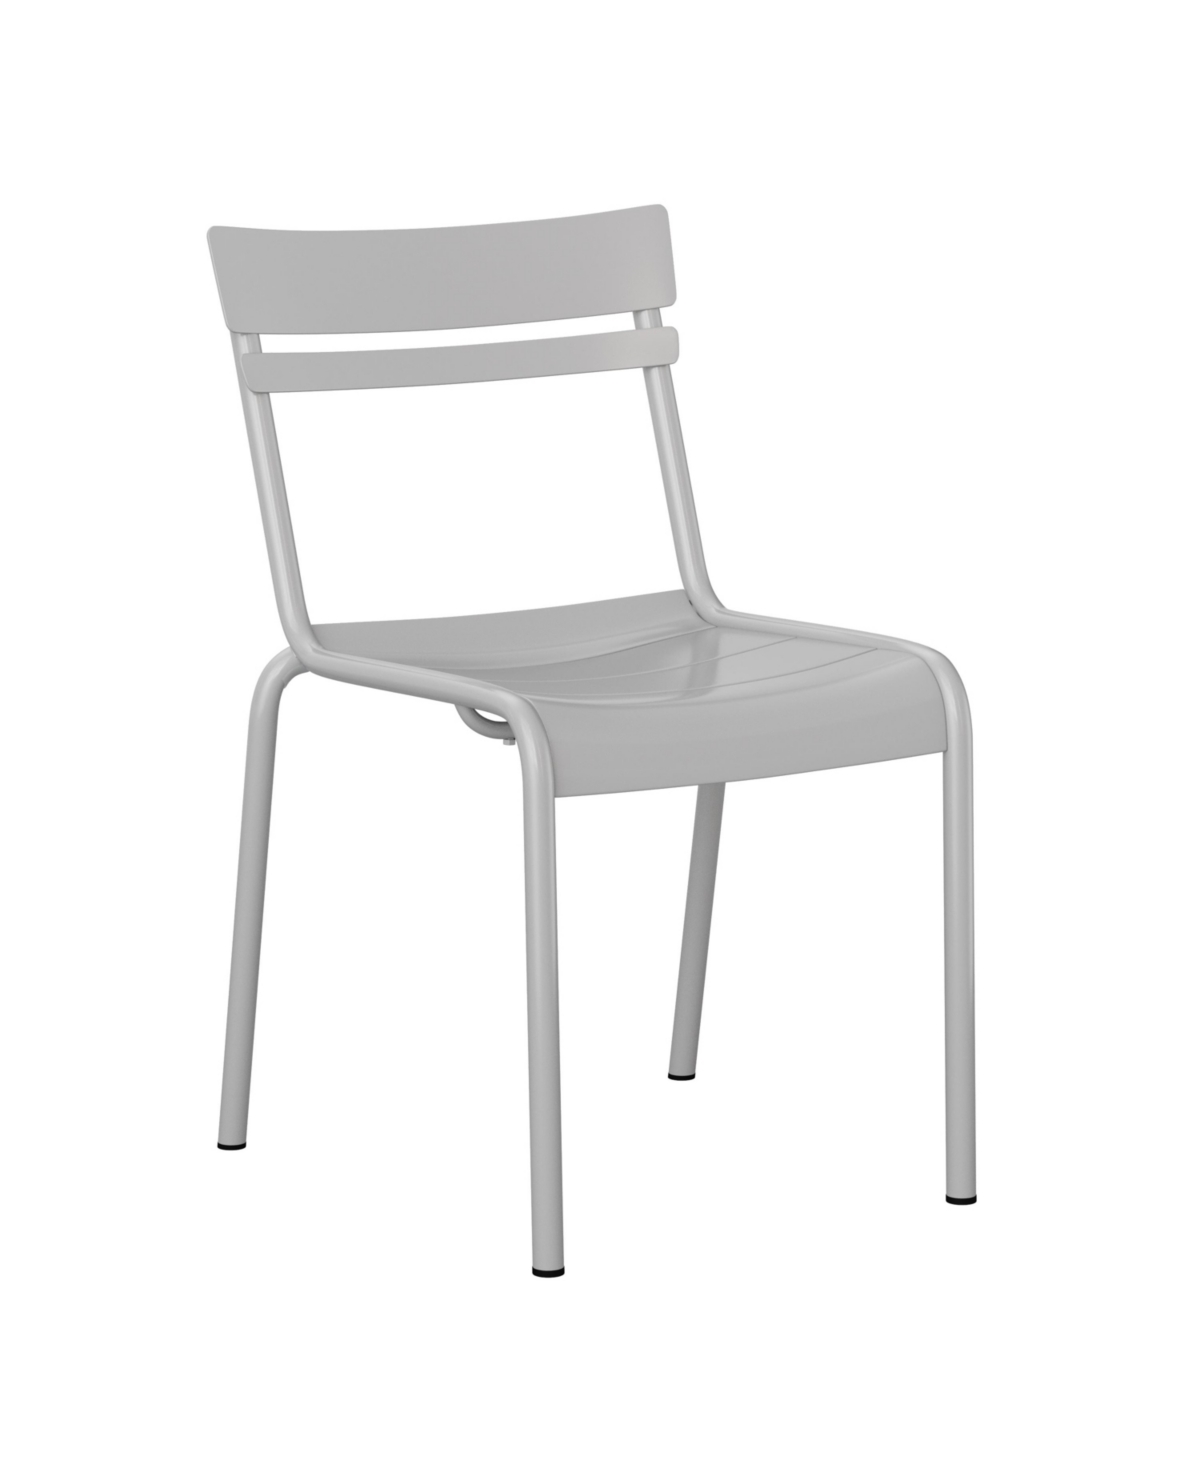 Emma+oliver Rennes Armless Powder Coated Steel Stacking Dining Chair With 2 Slat Back For Indoor-outdoor Use In Silver